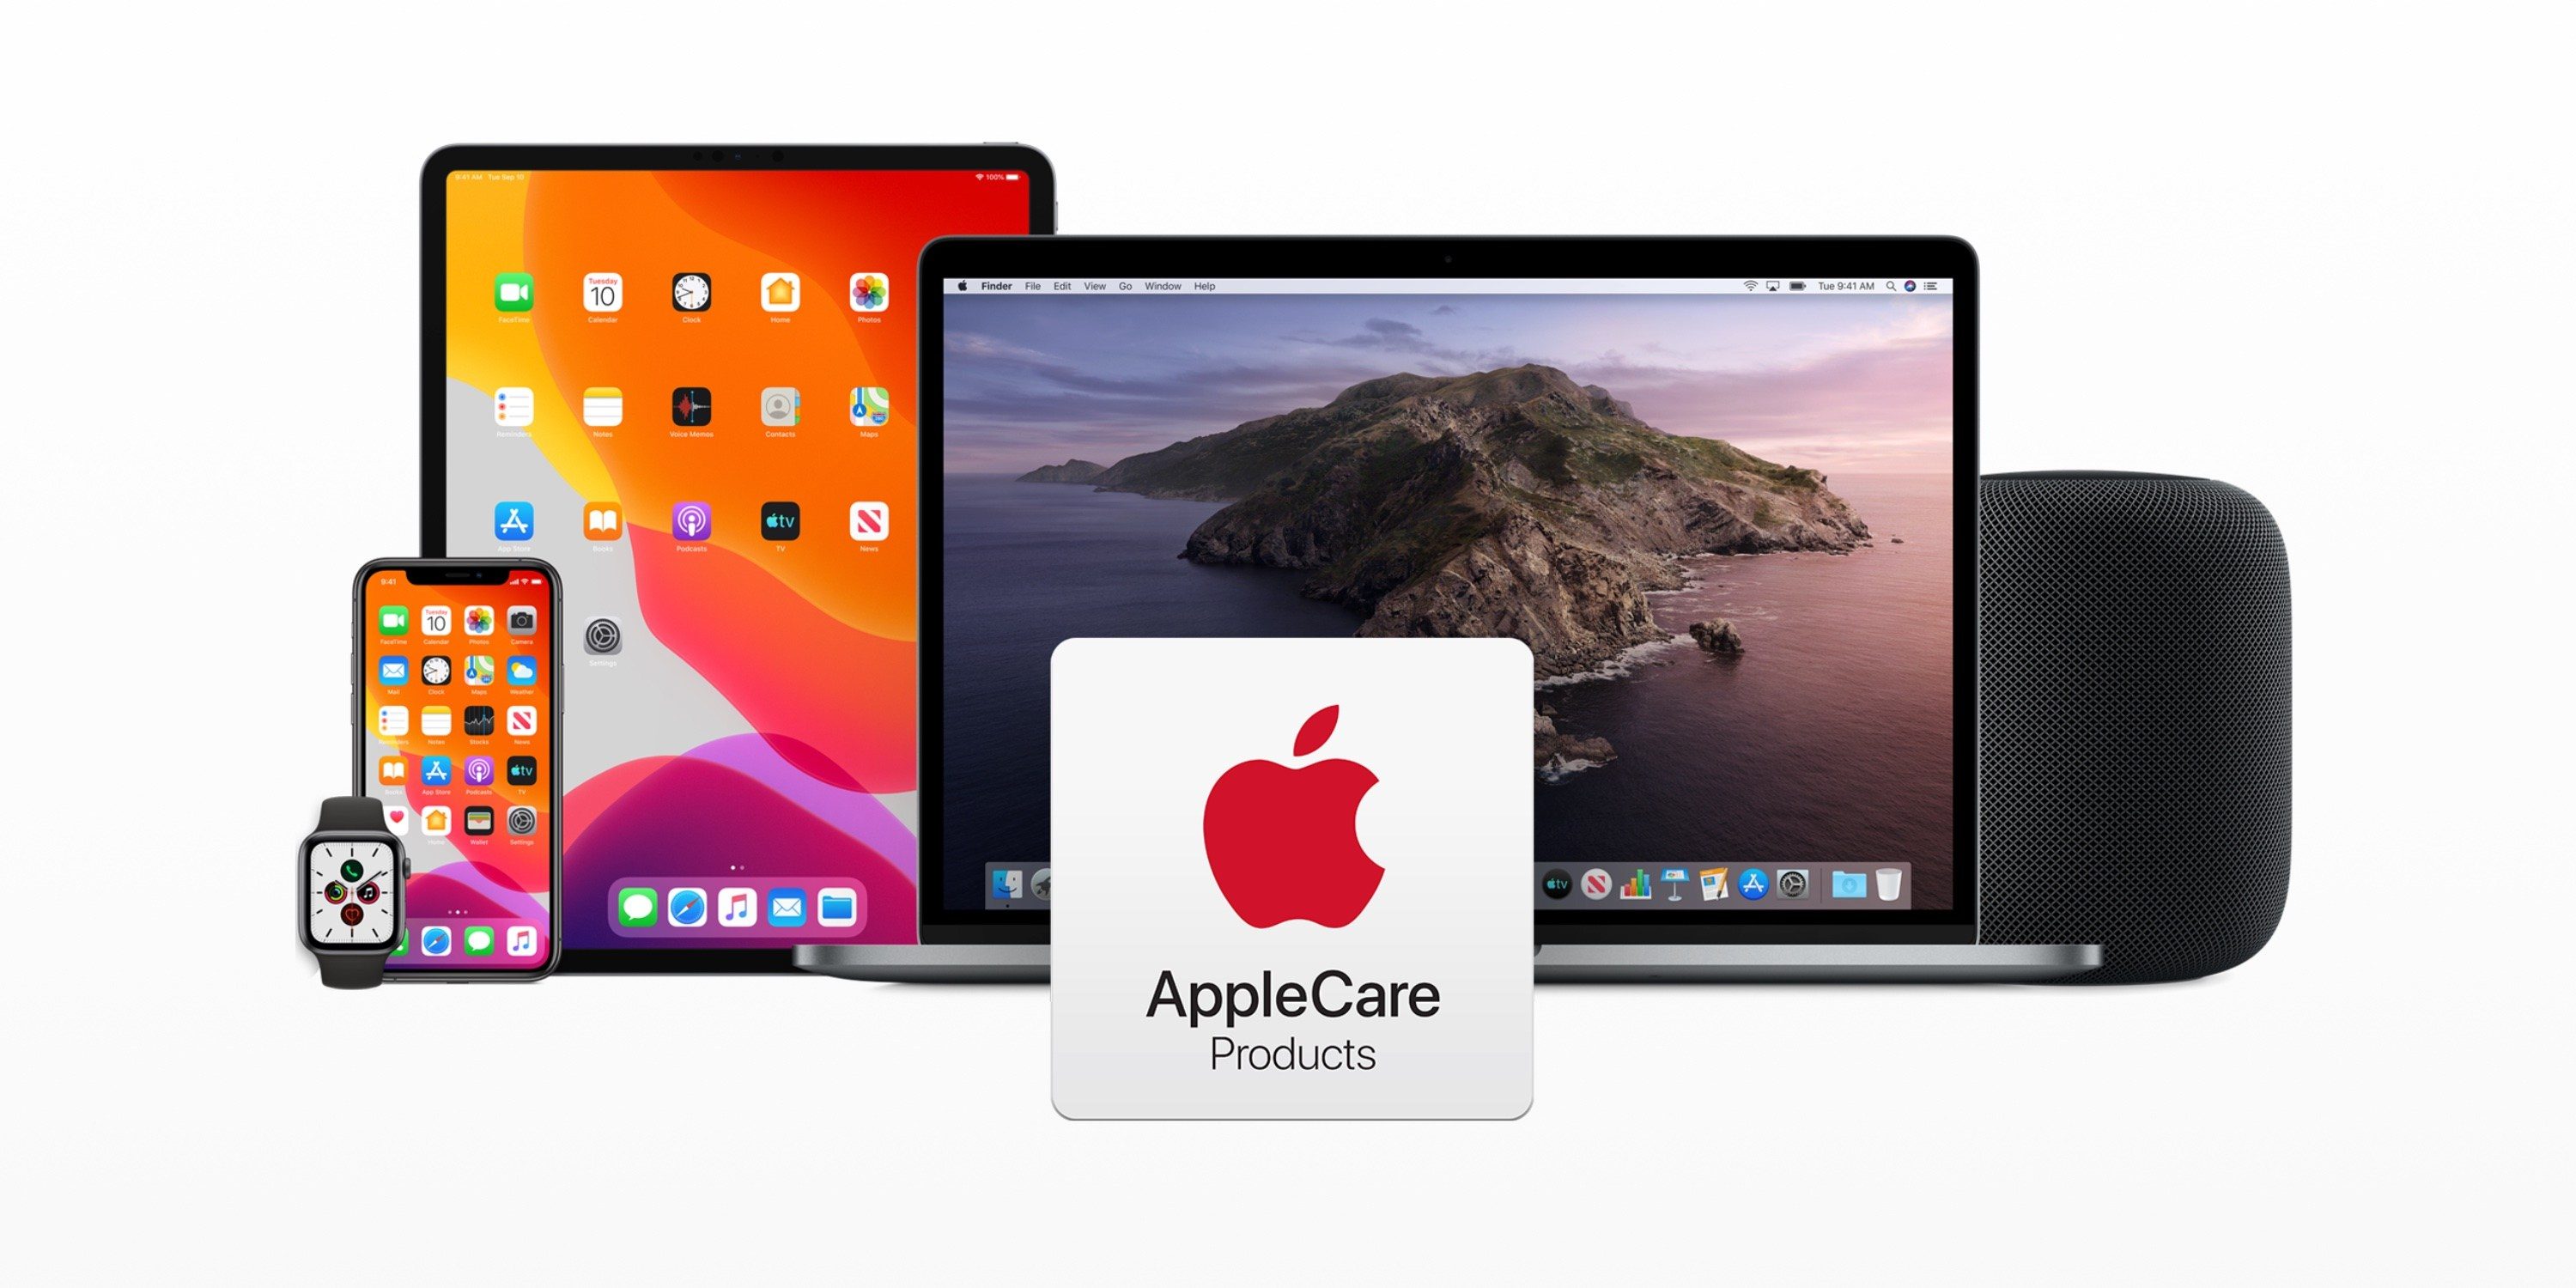 How to Decide if AppleCare is Worth the Price